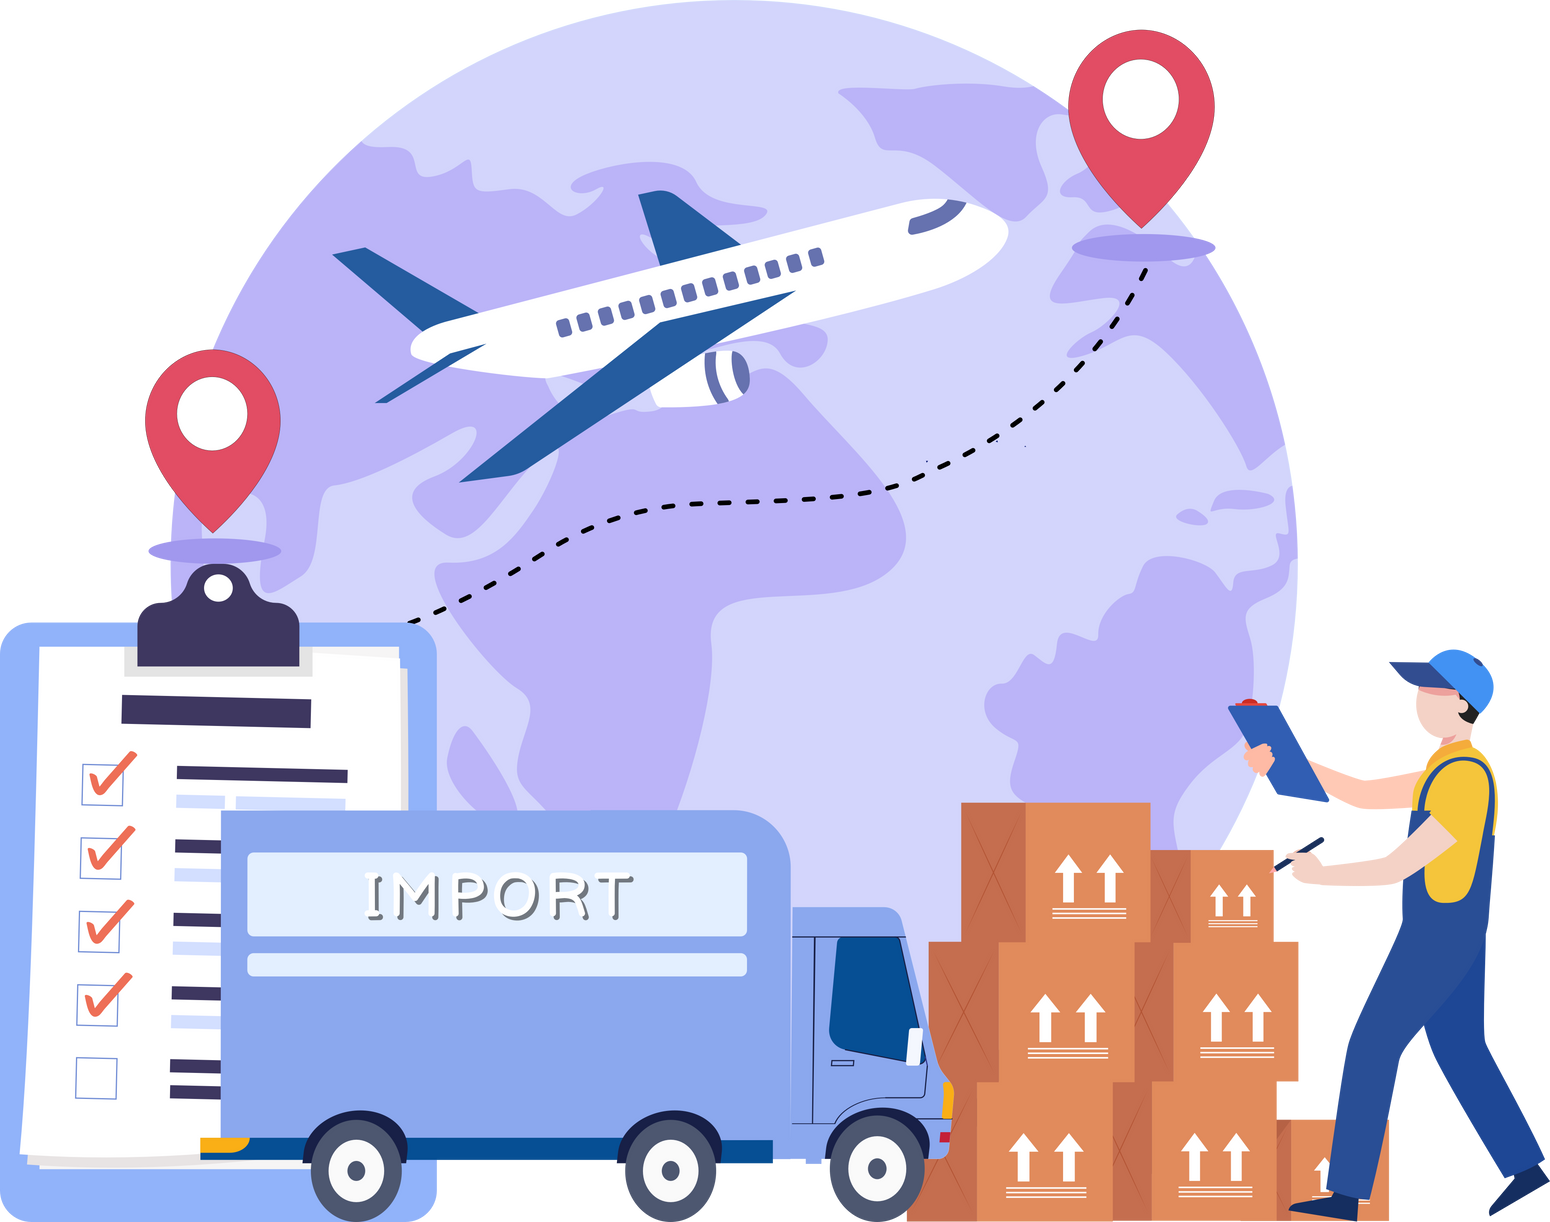 ir transportation, international Export and Import, Logistics Worldwide Distribution delivery service concept.